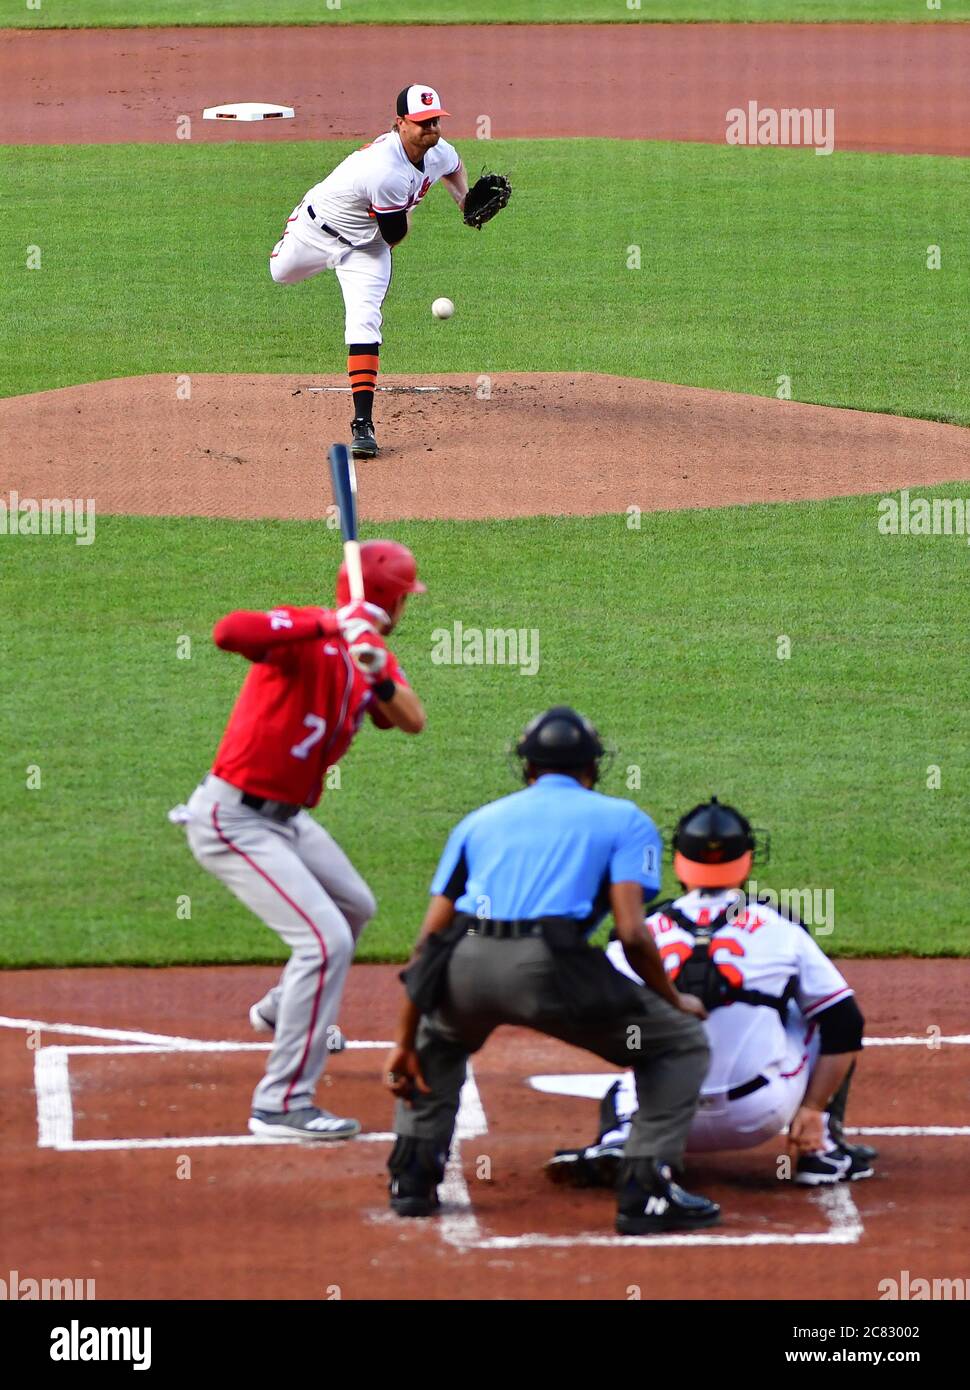 Baltimore, United States. 20th July, 2020. Baltimore Orioles starting pitcher Alex Cobb (17) delivers to Washington Nationals Trea Turner (7) during the first inning of a Major League Baseball preseason game at Camden Yards in Baltimore, MD, on Monday, July 20, 2020. Photo by David Tulis/UPI Credit: UPI/Alamy Live News Stock Photo